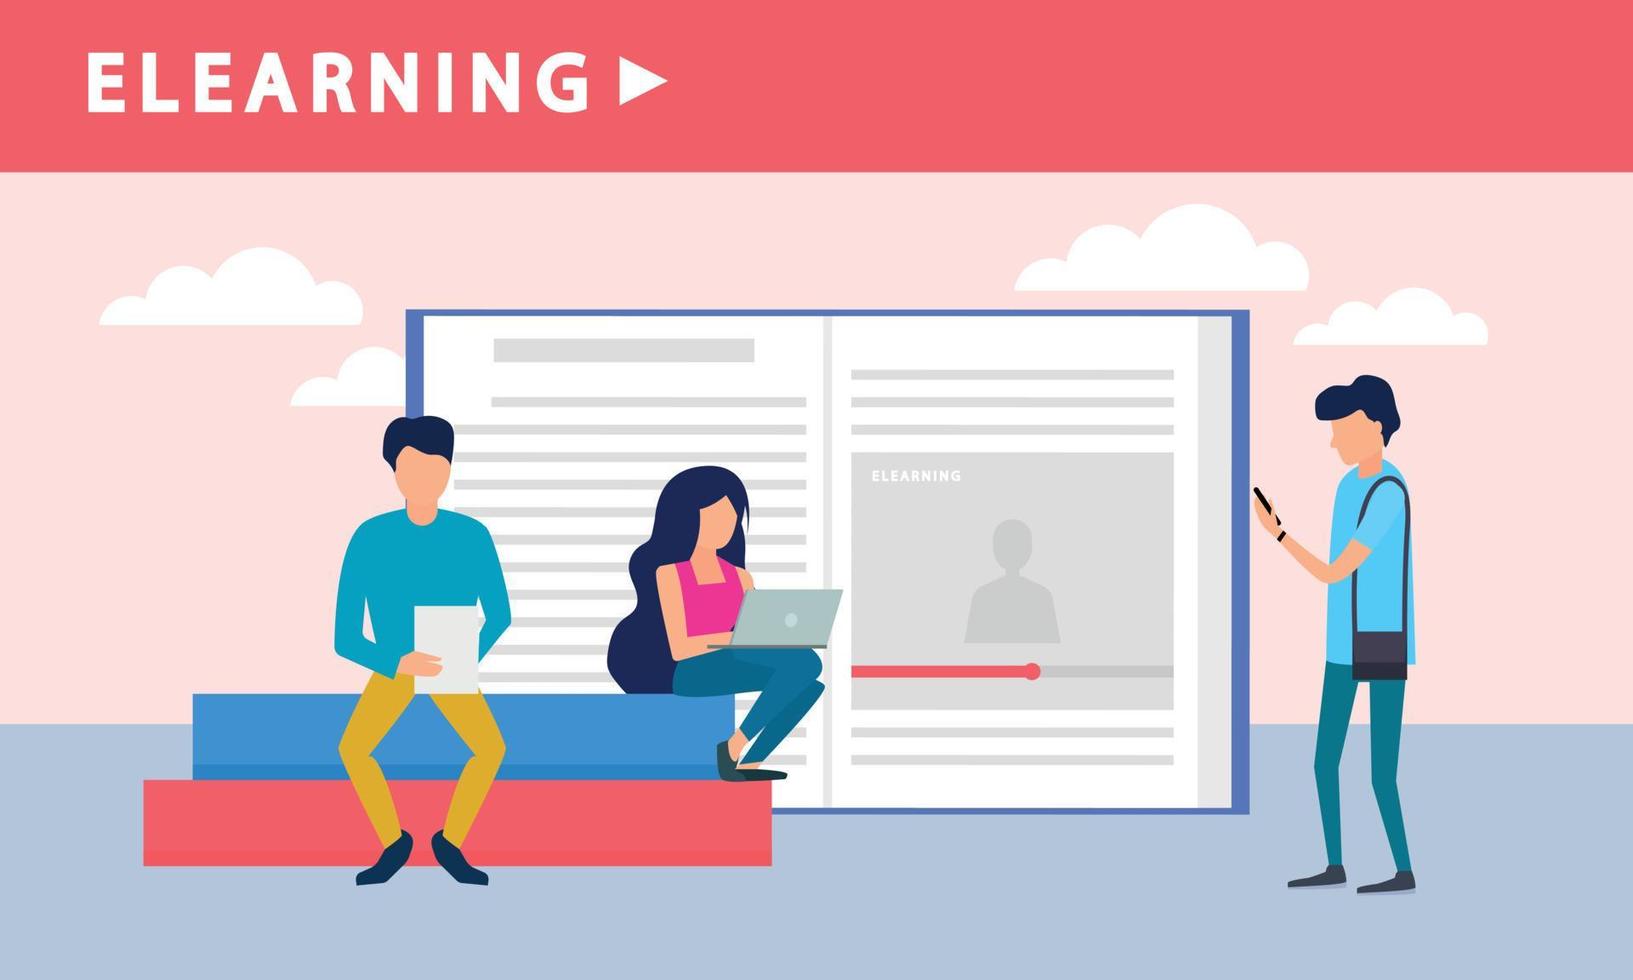 People elearning banner, flat style vector